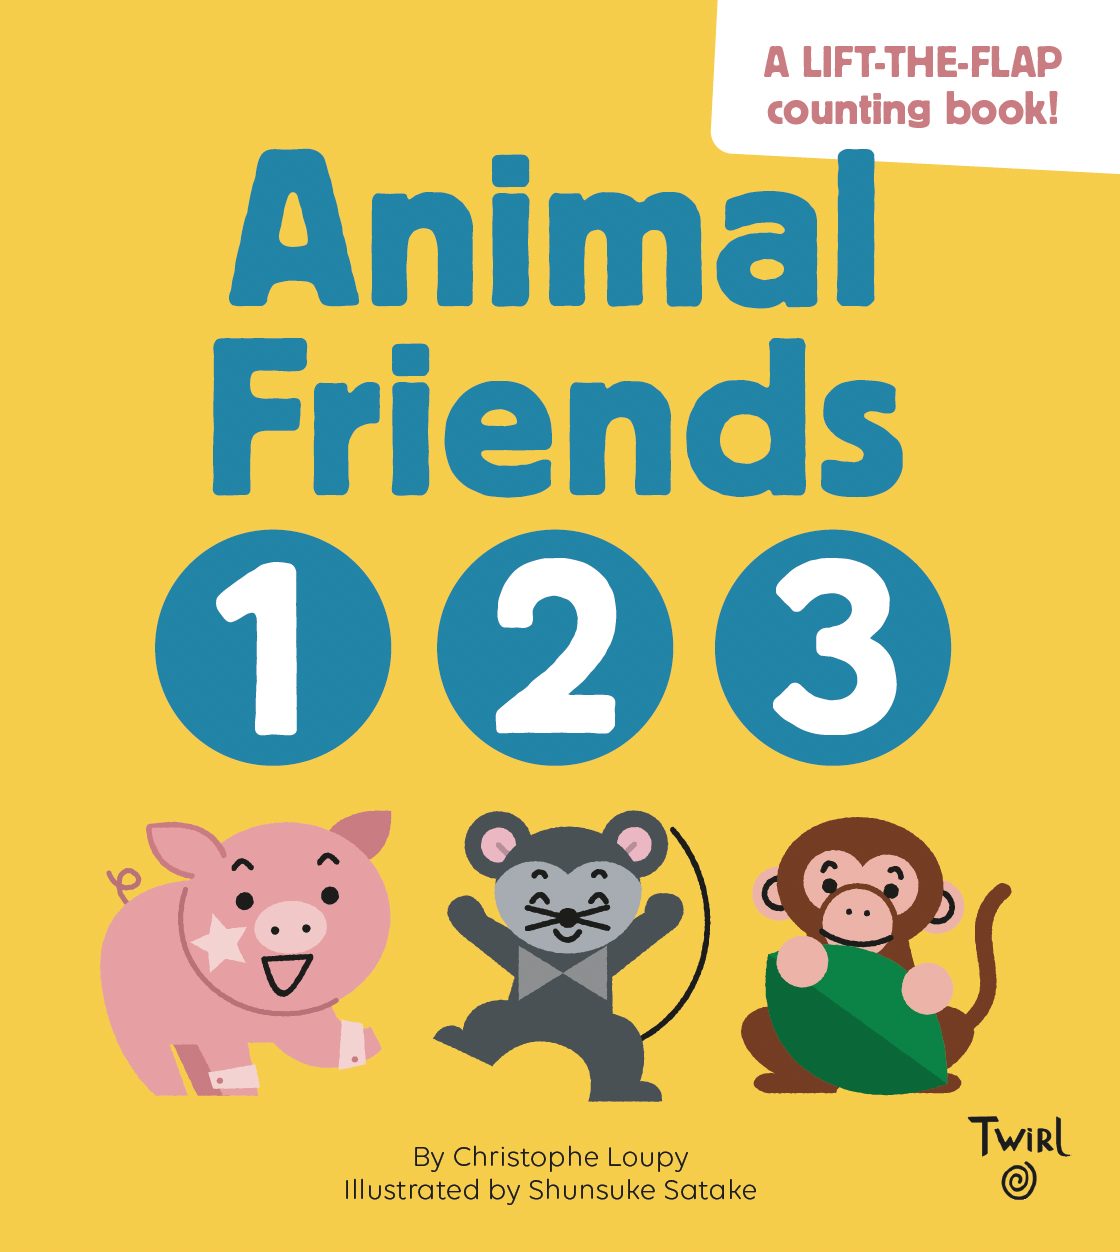 Cover image of "Animal Friends 1 2 3," a picture book written by Christophe Loupy and illustrated by Shunsuke Satake